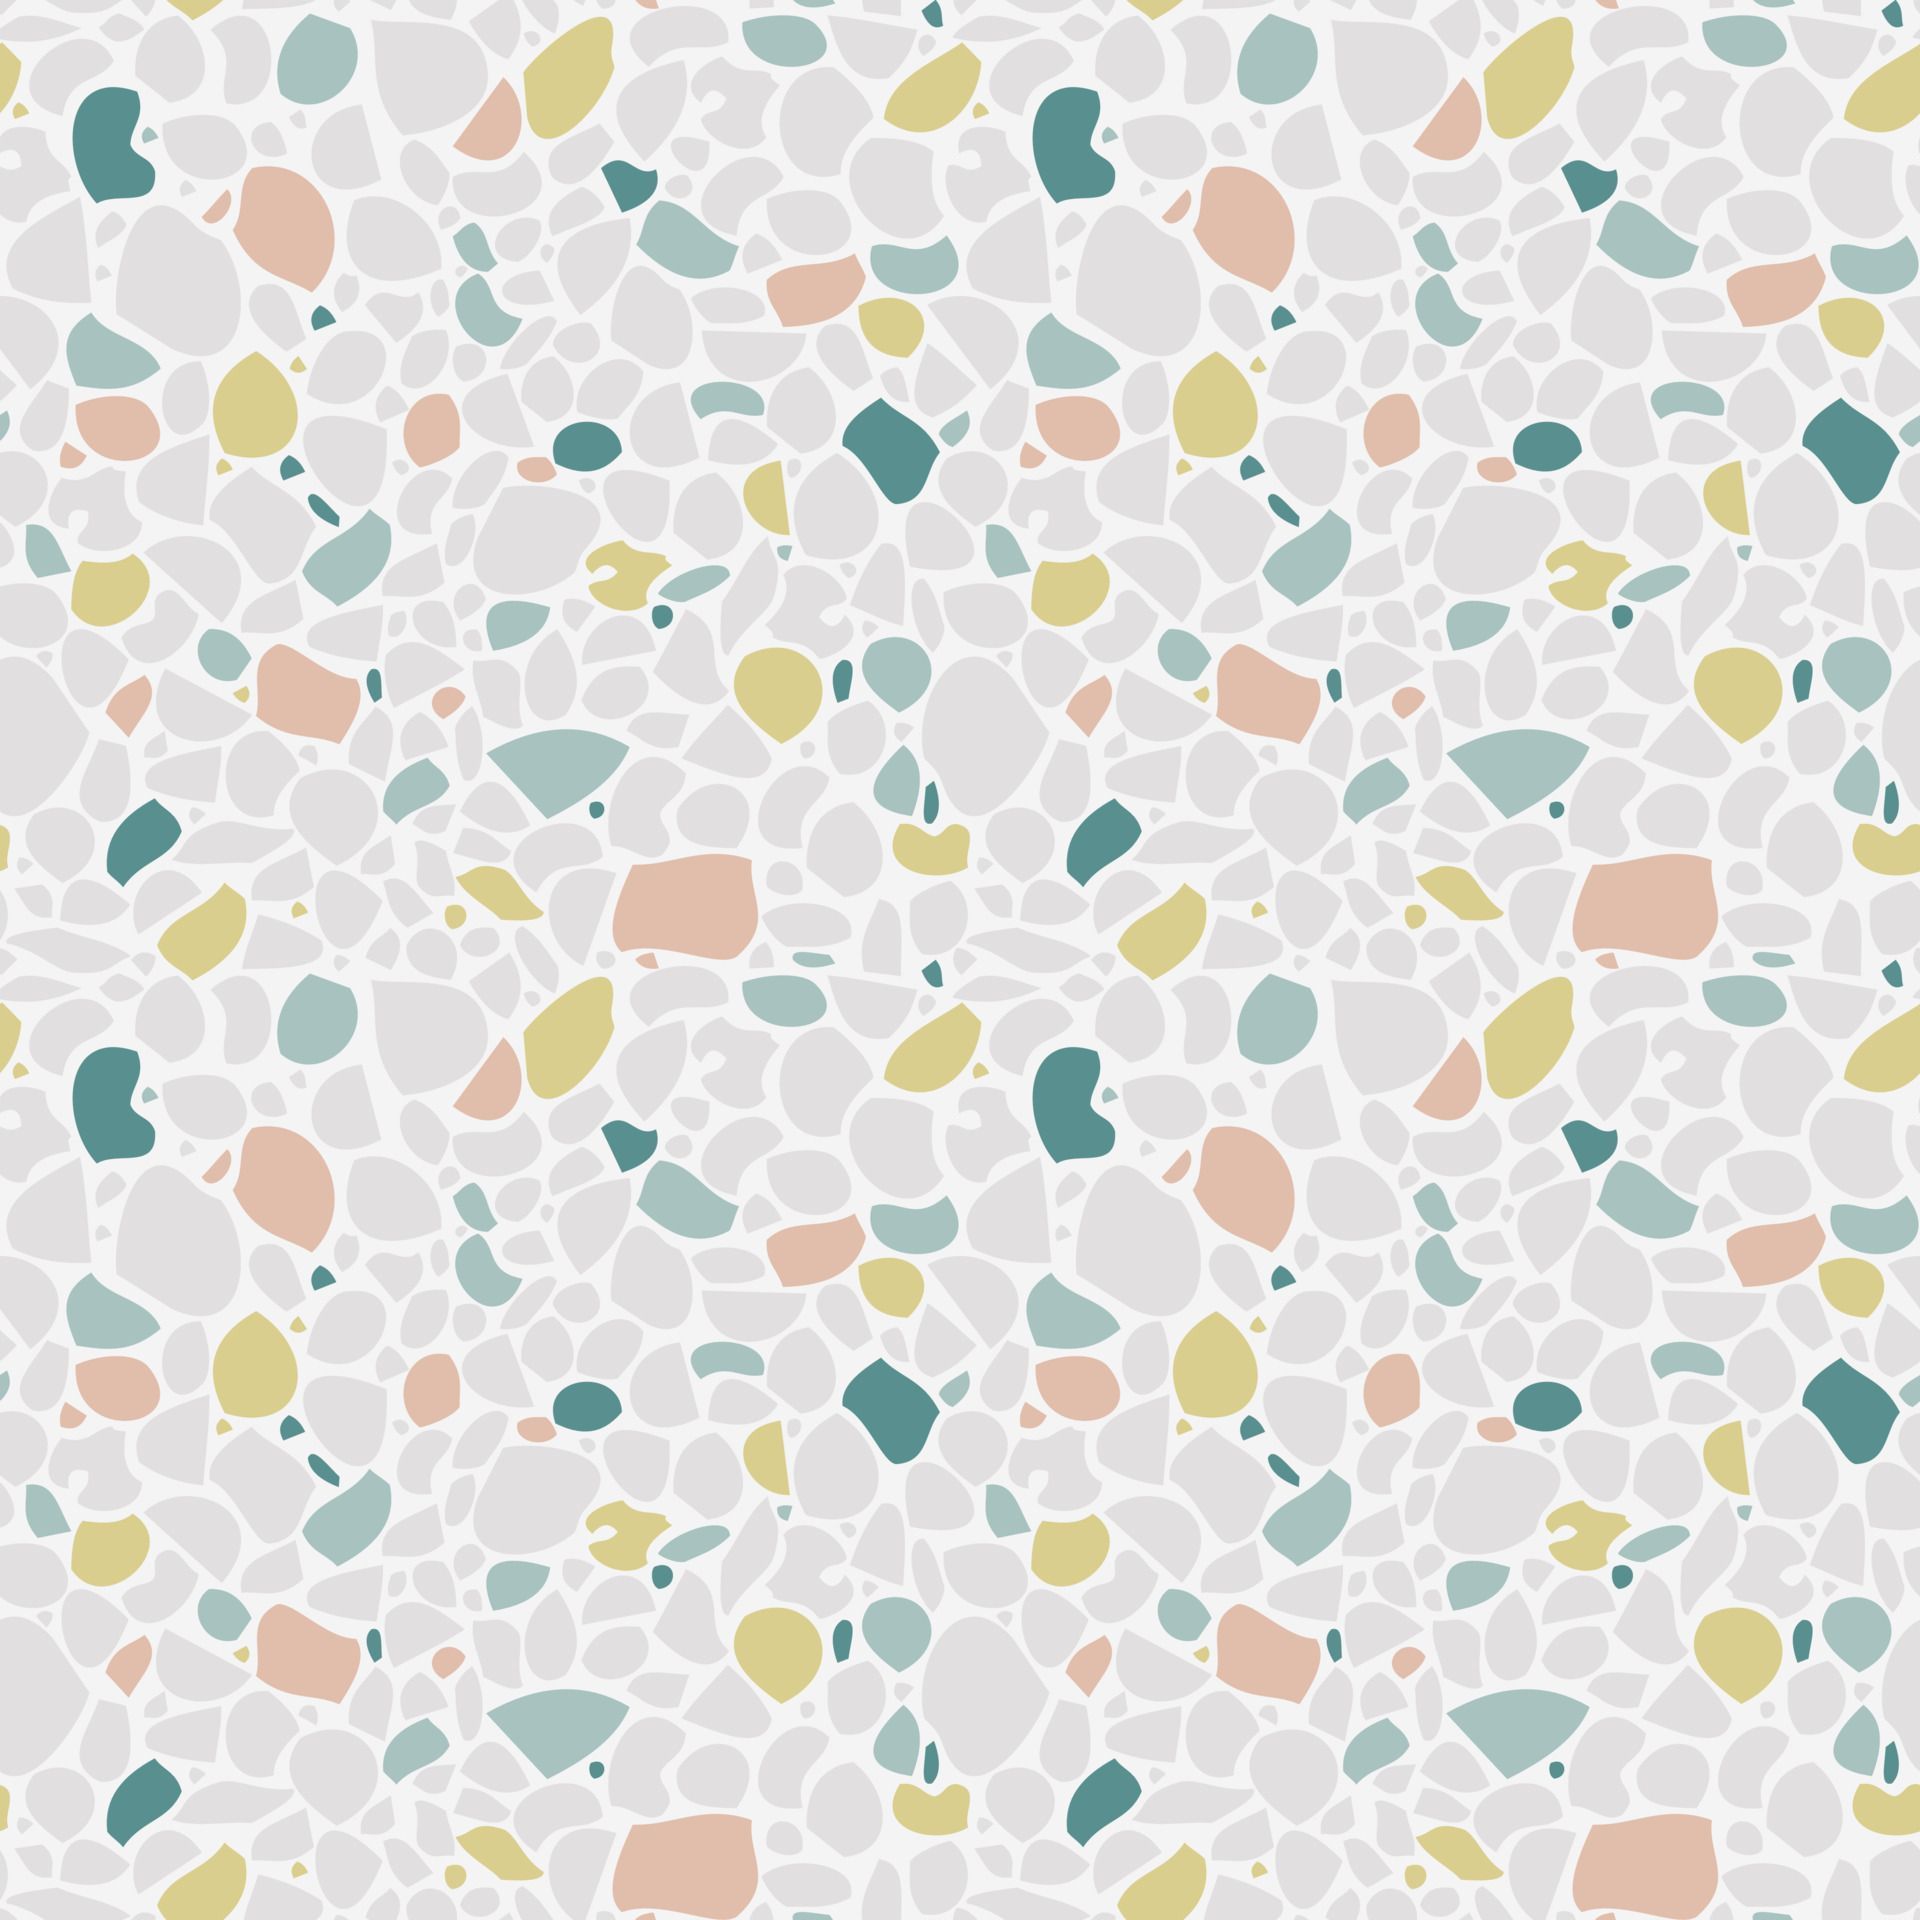 Cute terrazzo seamless pattern in natural pastel colors. Abstract mosaic stone texture background. Realistic modern terrazo minimalist art square backdrop. Colorful shards or sprinkles